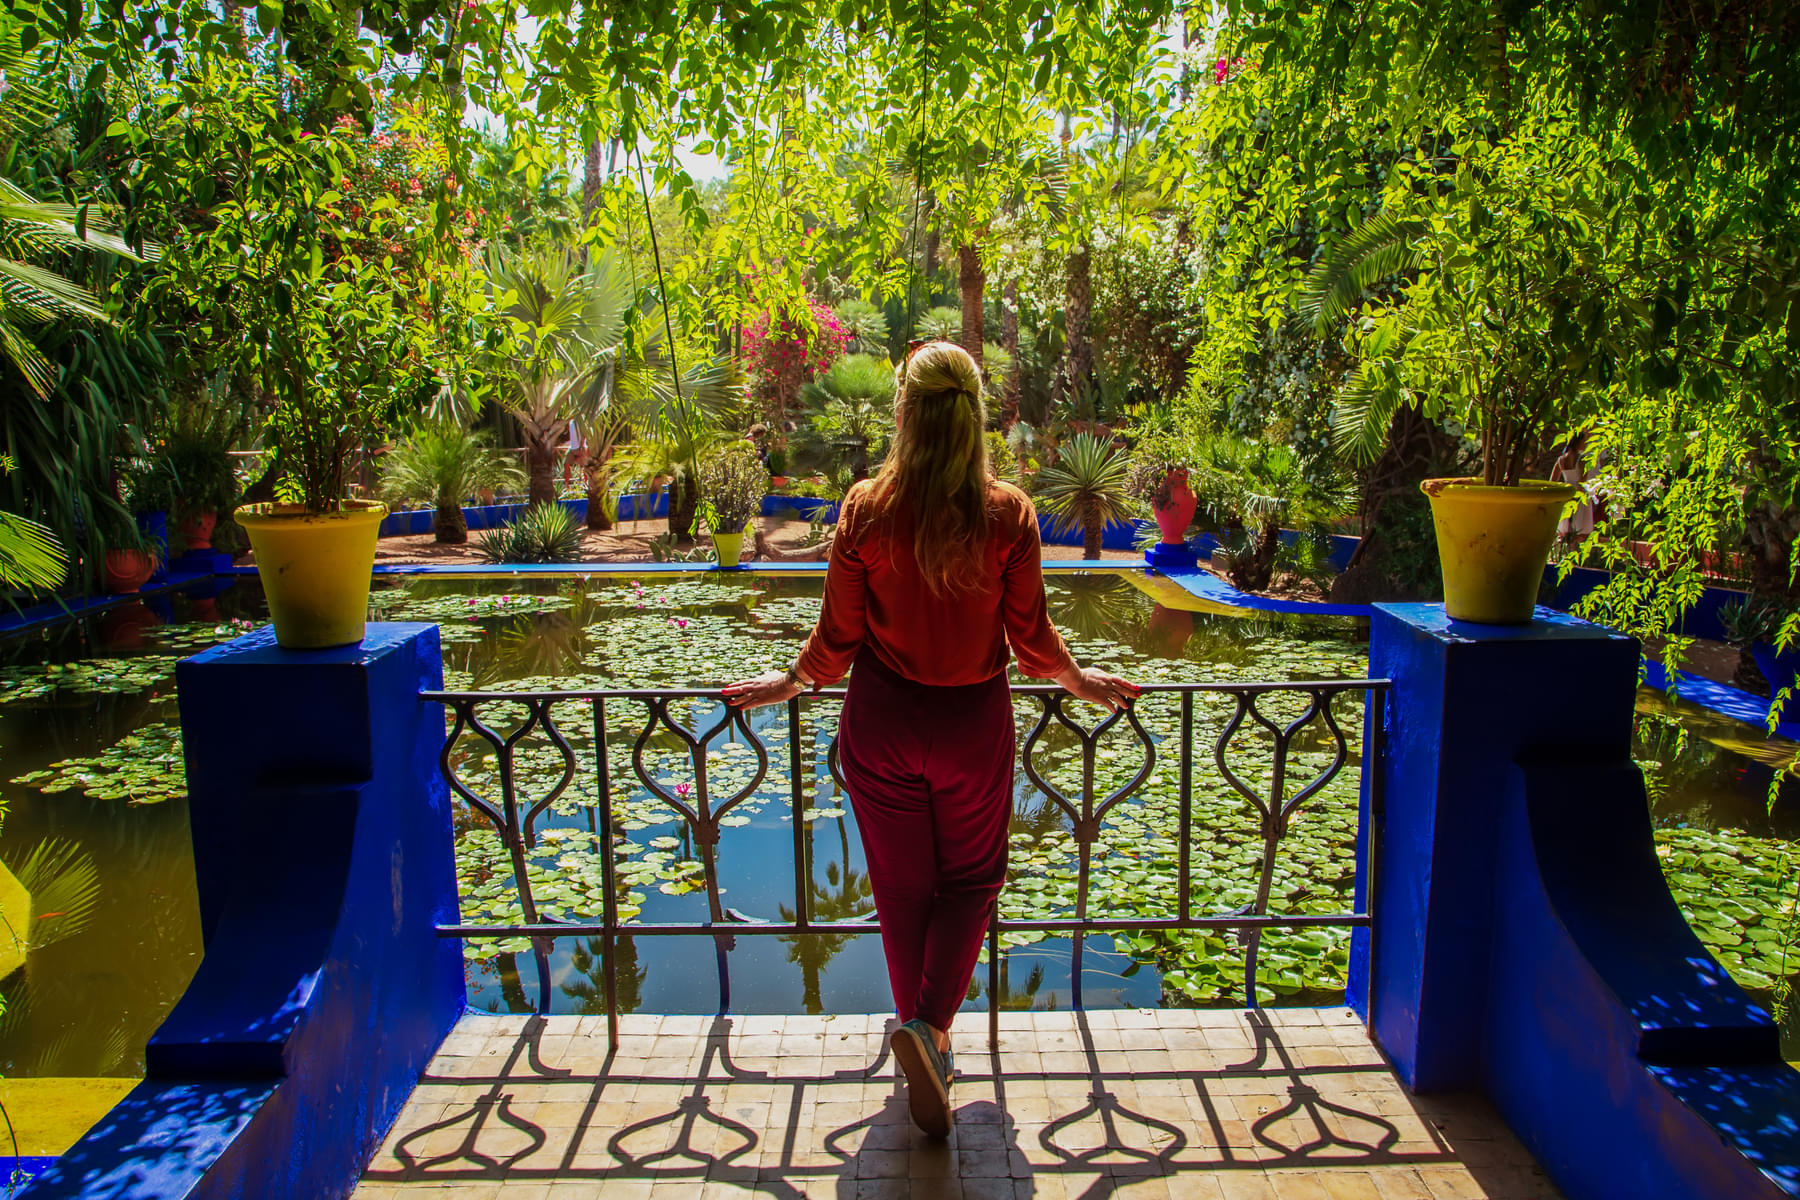 Welcome to the beautiful Jardin Majorelle